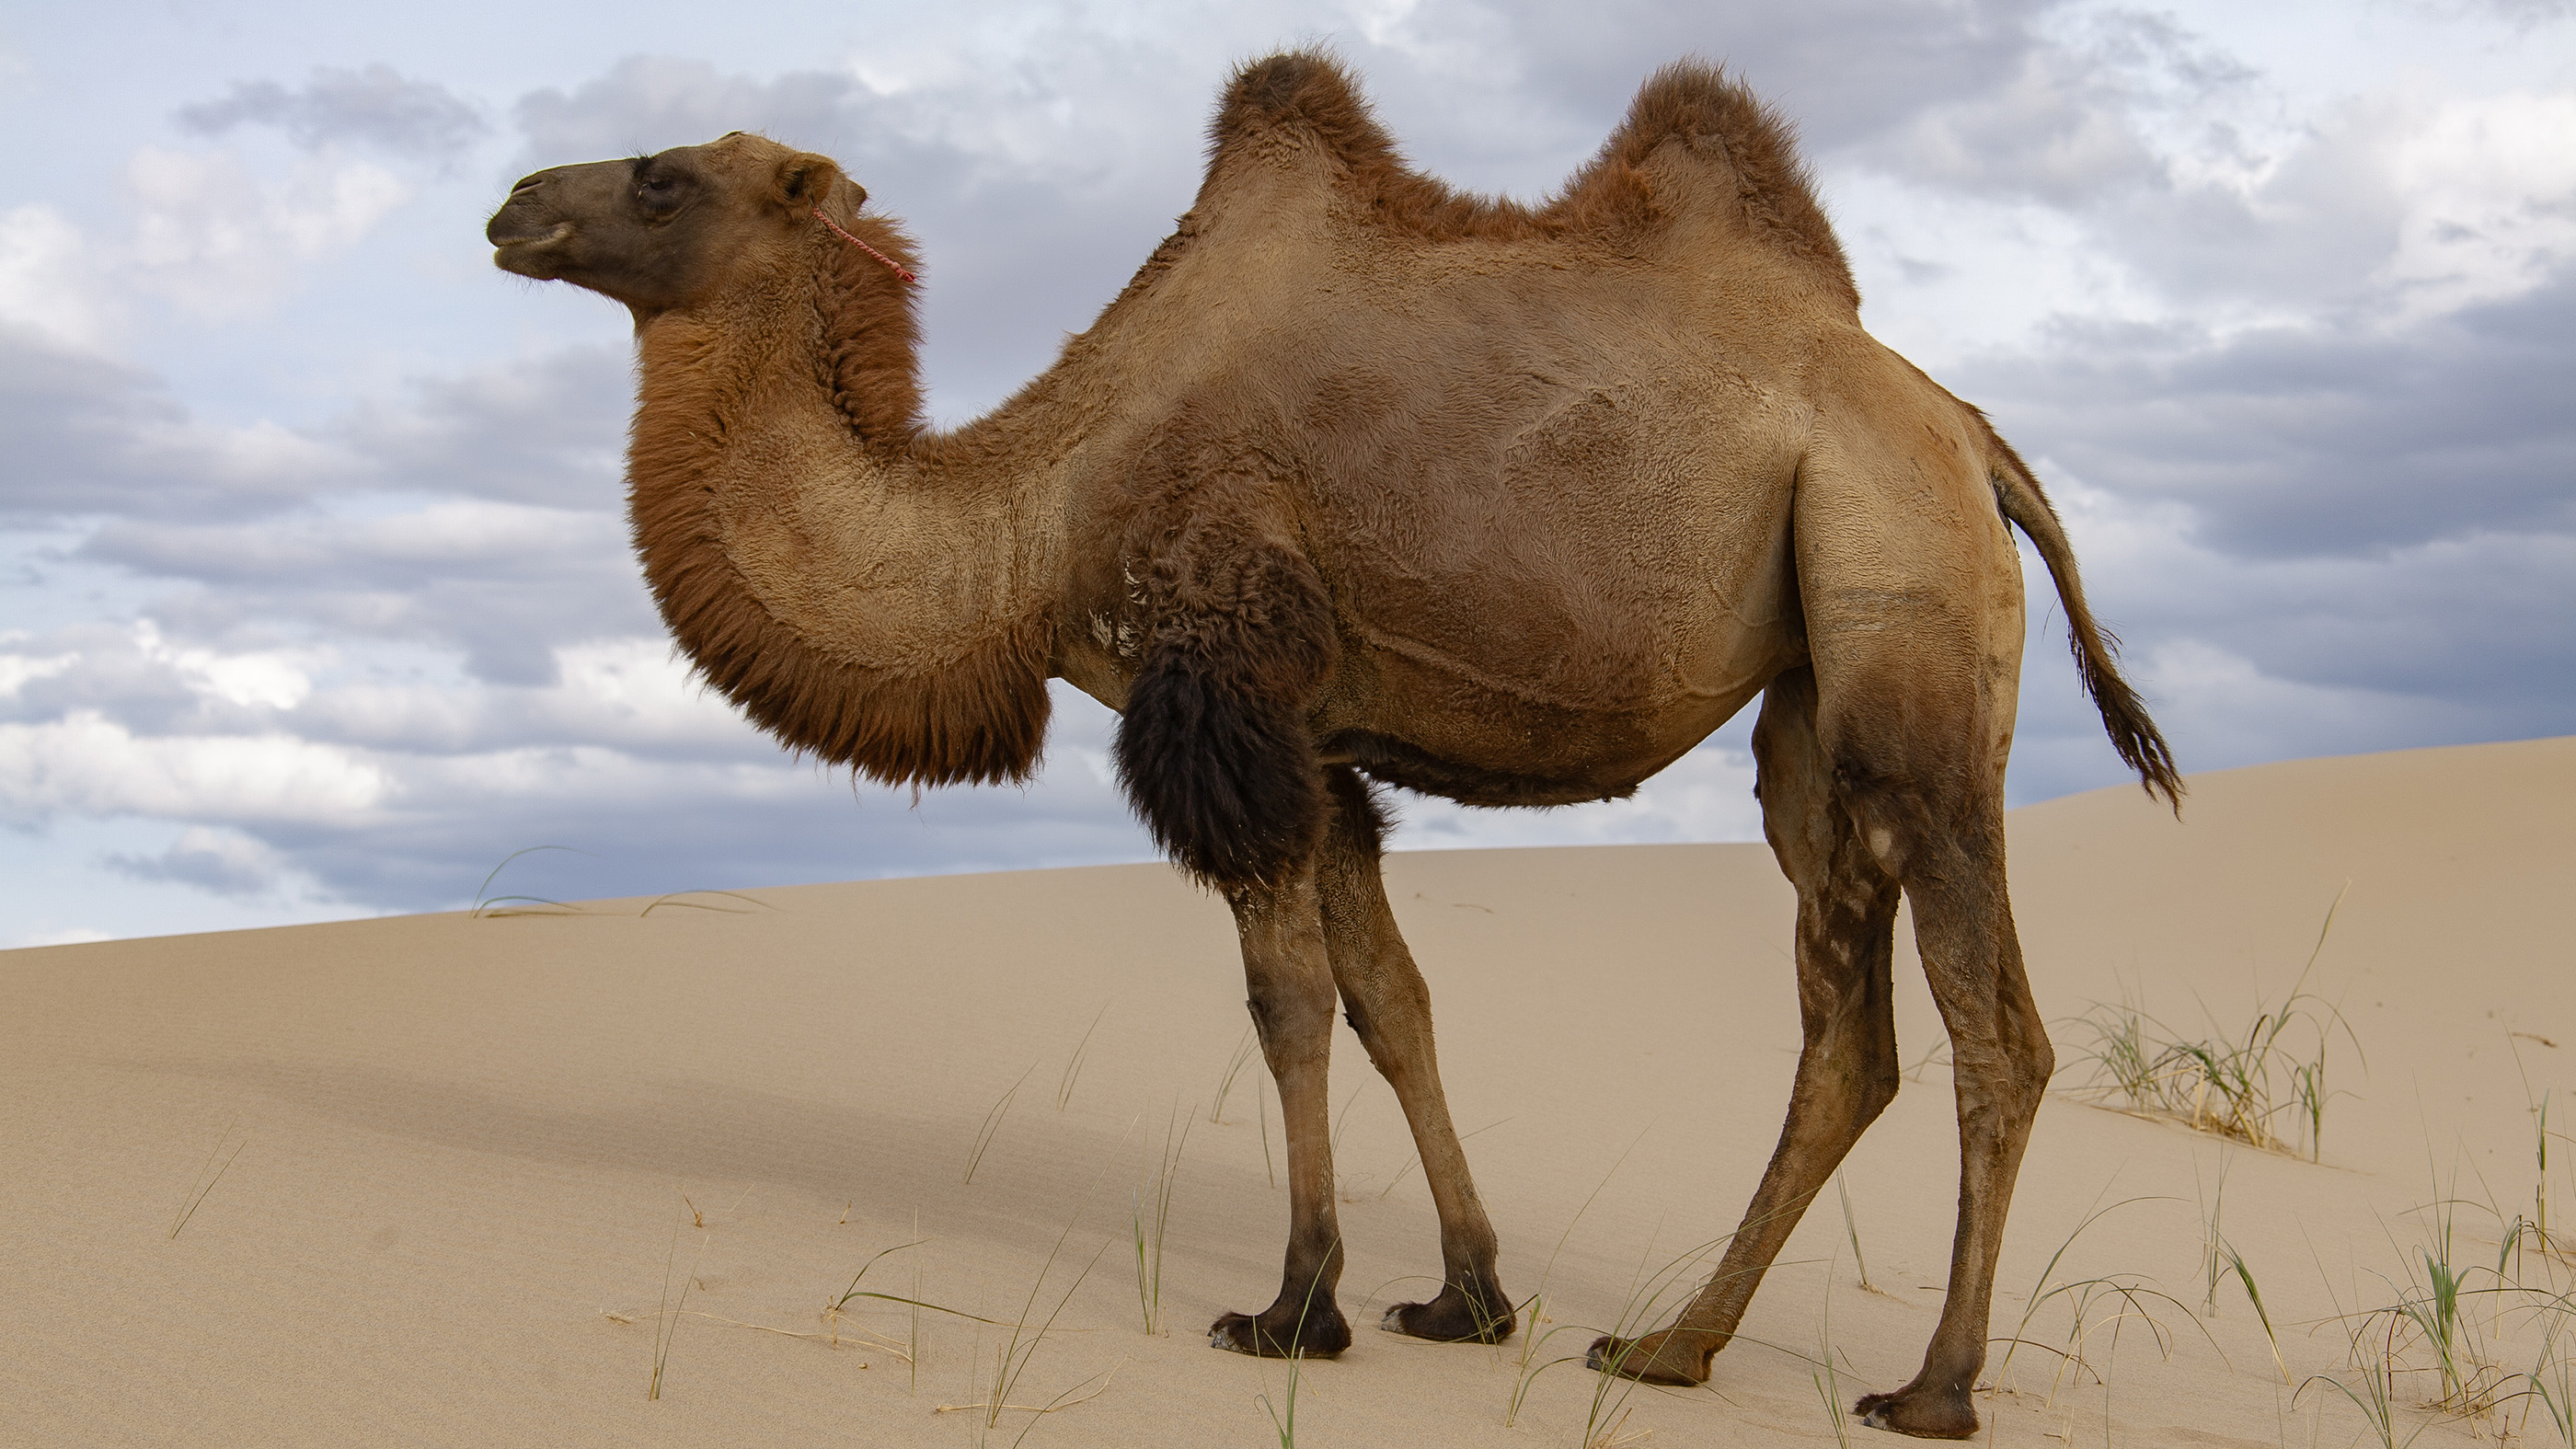 Here, a domesticated Bactrian camel, showing off two fat humps.